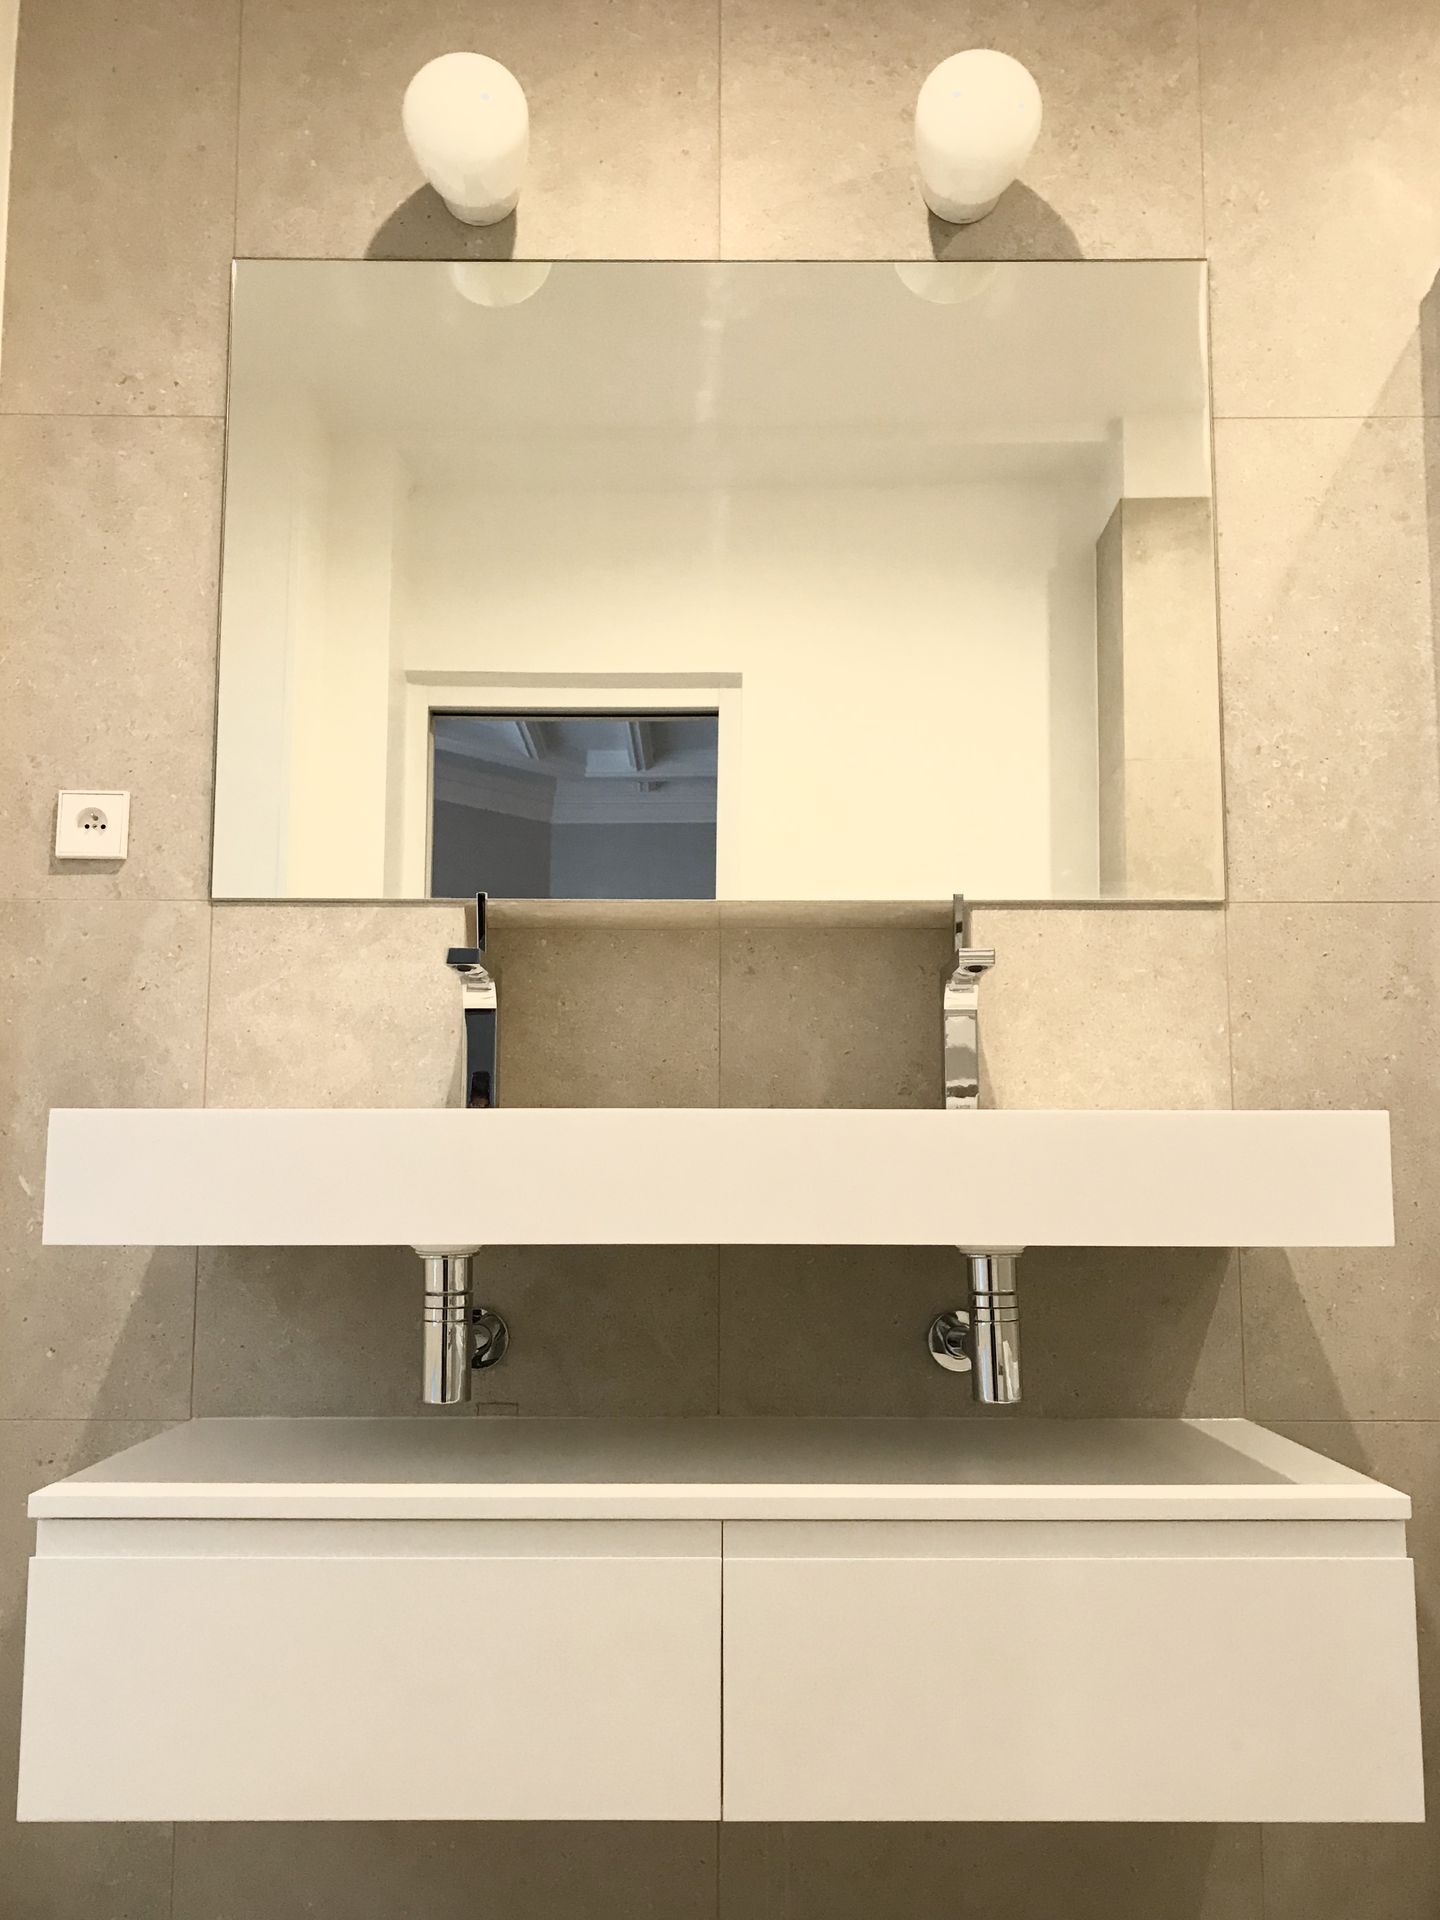 Bathroom washbasin and cabinet from Project CardenetGranger-Margon using Riluxa